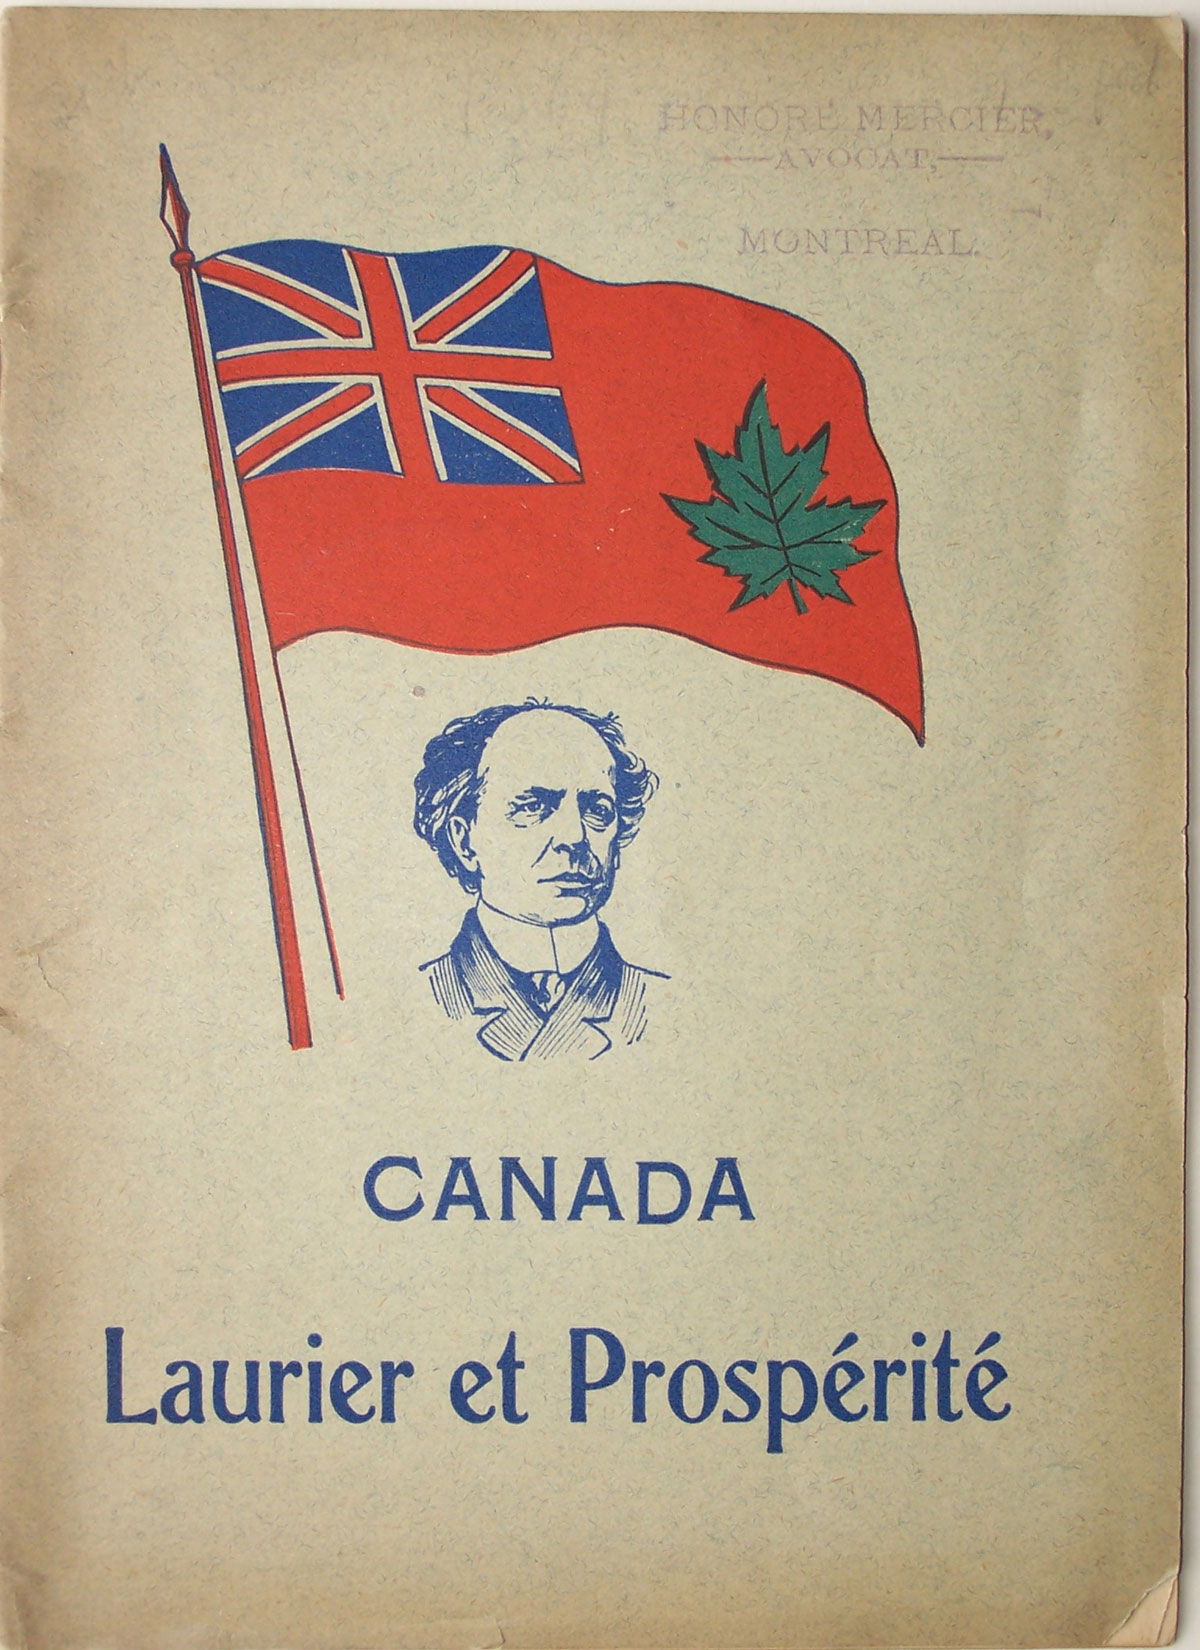 Promotional pamphlet: Canada : Laurier et Prospérité [Canada: Laurier and Prosperity], 1903 — an early example of political marketing. Canadian Museum of History, Library, ACQ 2012.17, temporary no. 174.3. Gift of Serge Joyal. Photo: Xavier Gélinas, 174.3